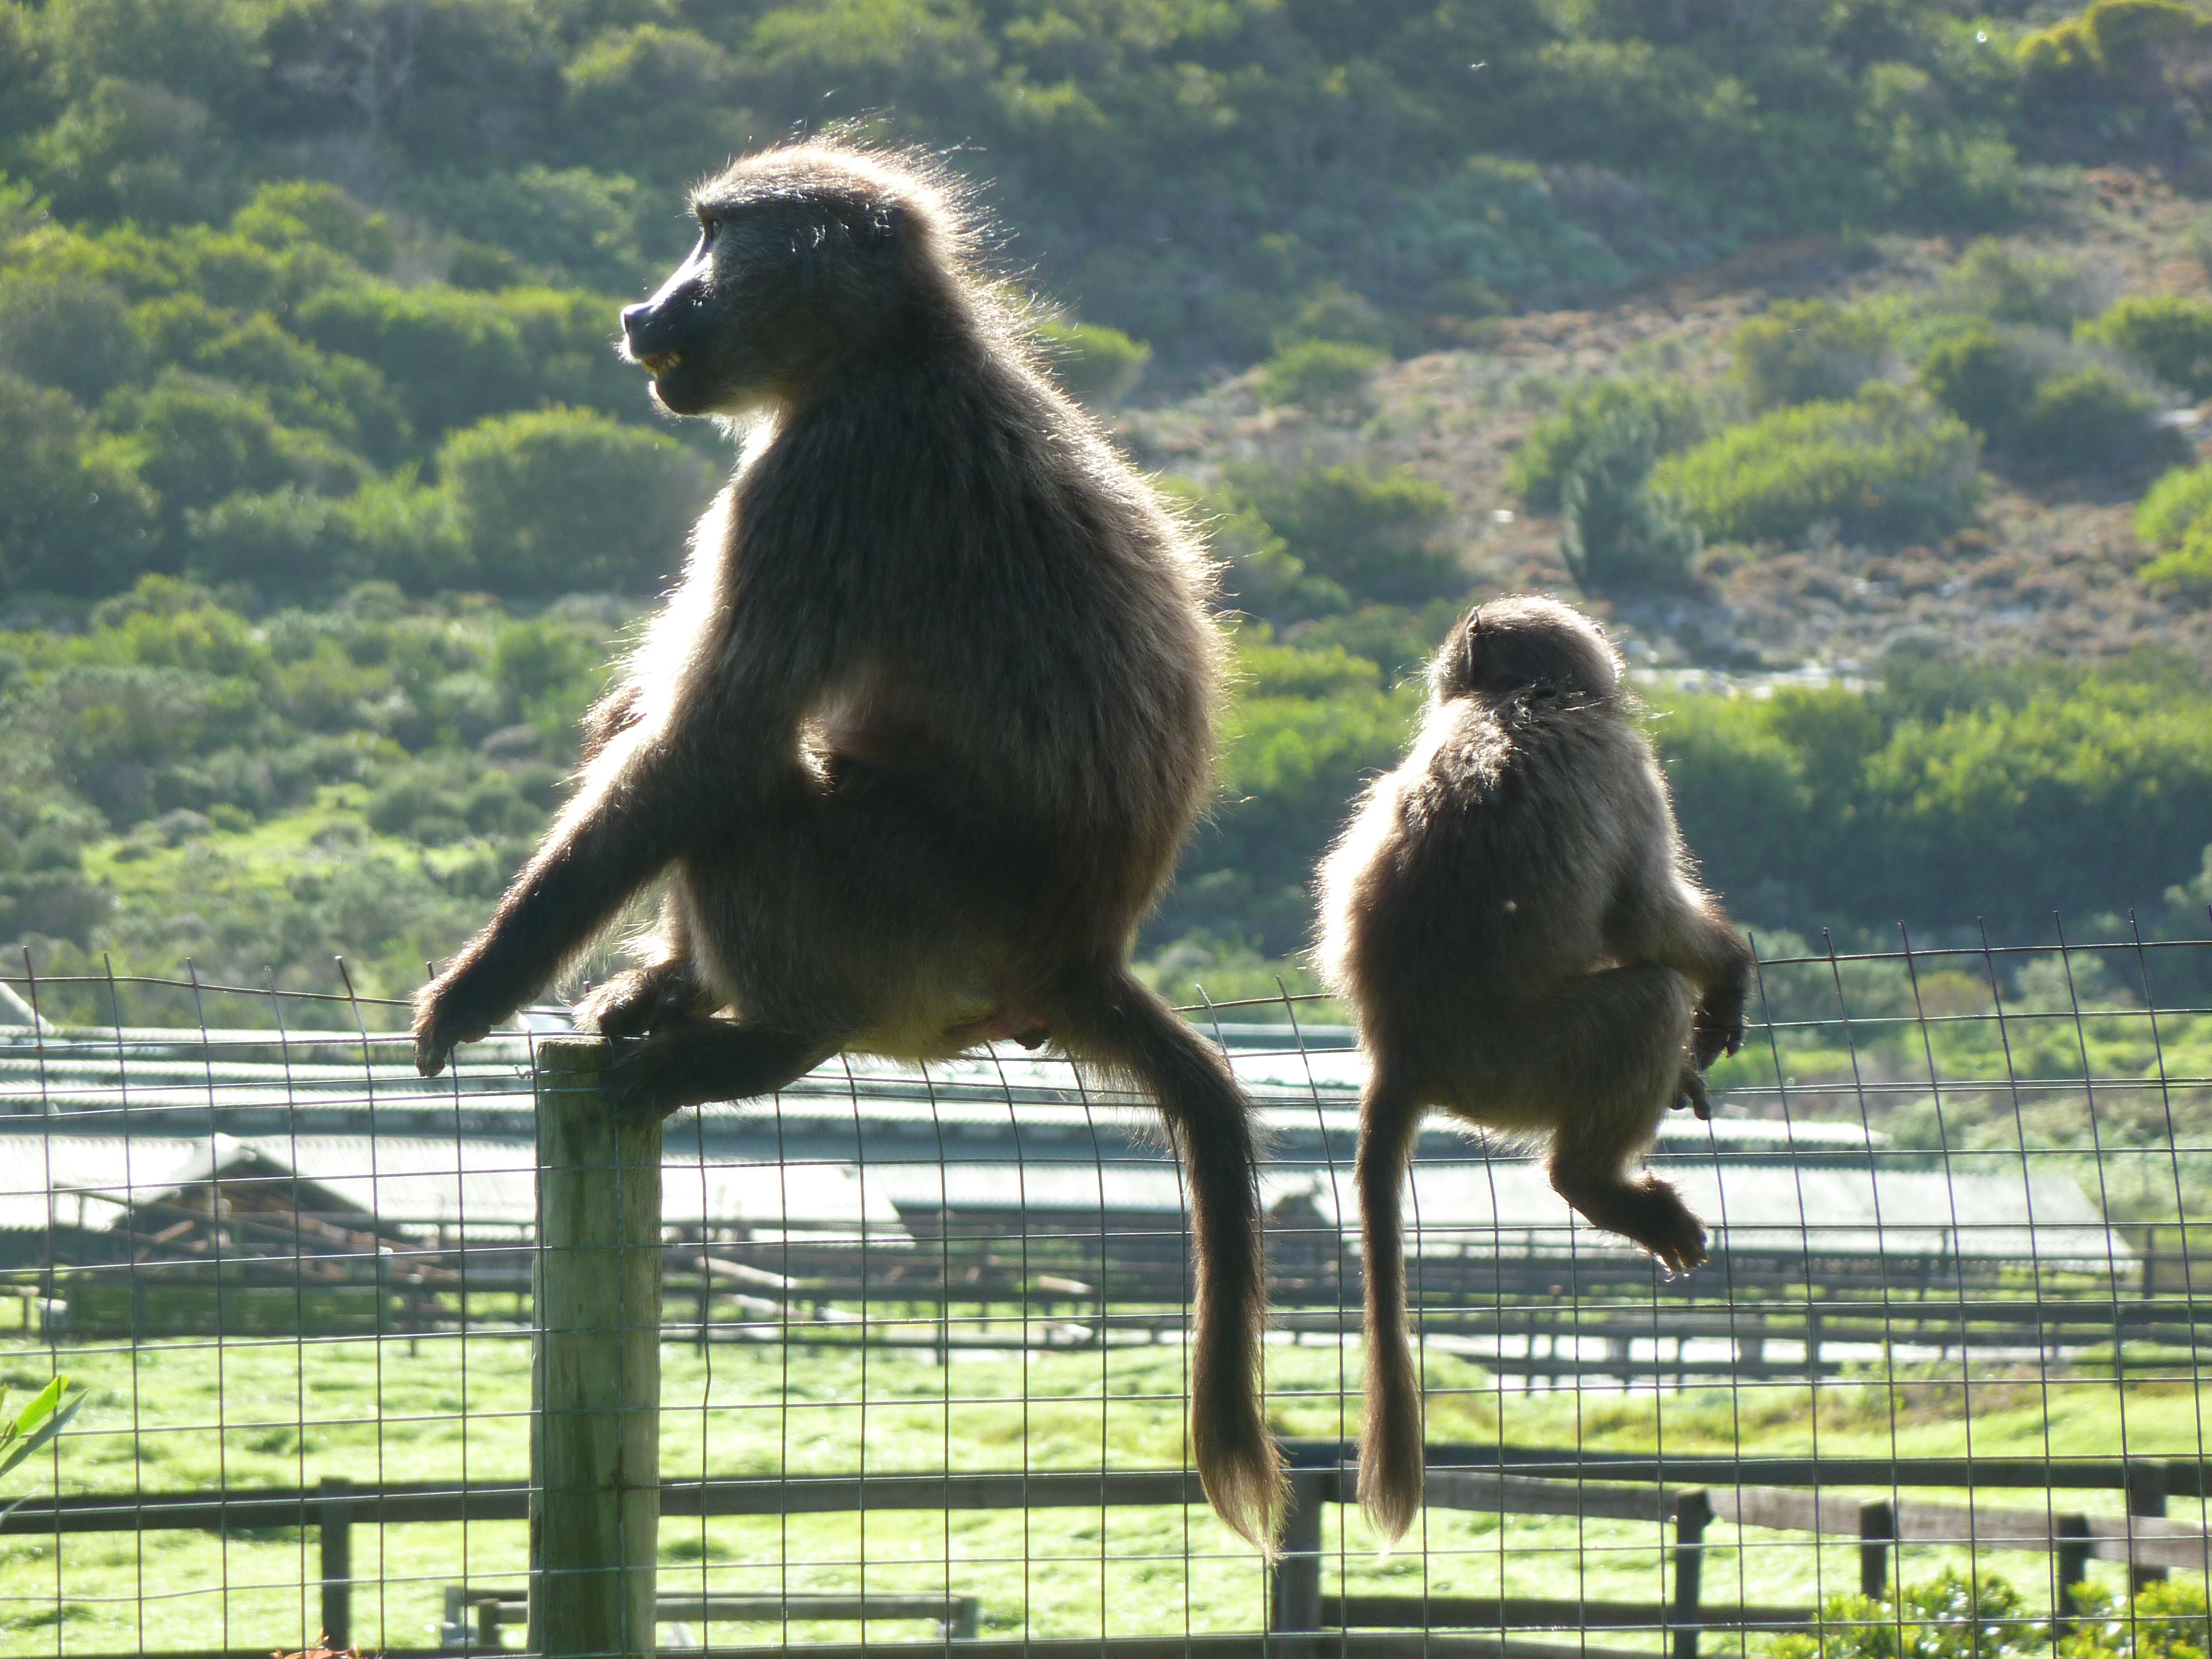 http://beautifuldaytours.co.za/wp-content/gallery2/cape-of-good-hope-tour/chacma-baboons.jpg